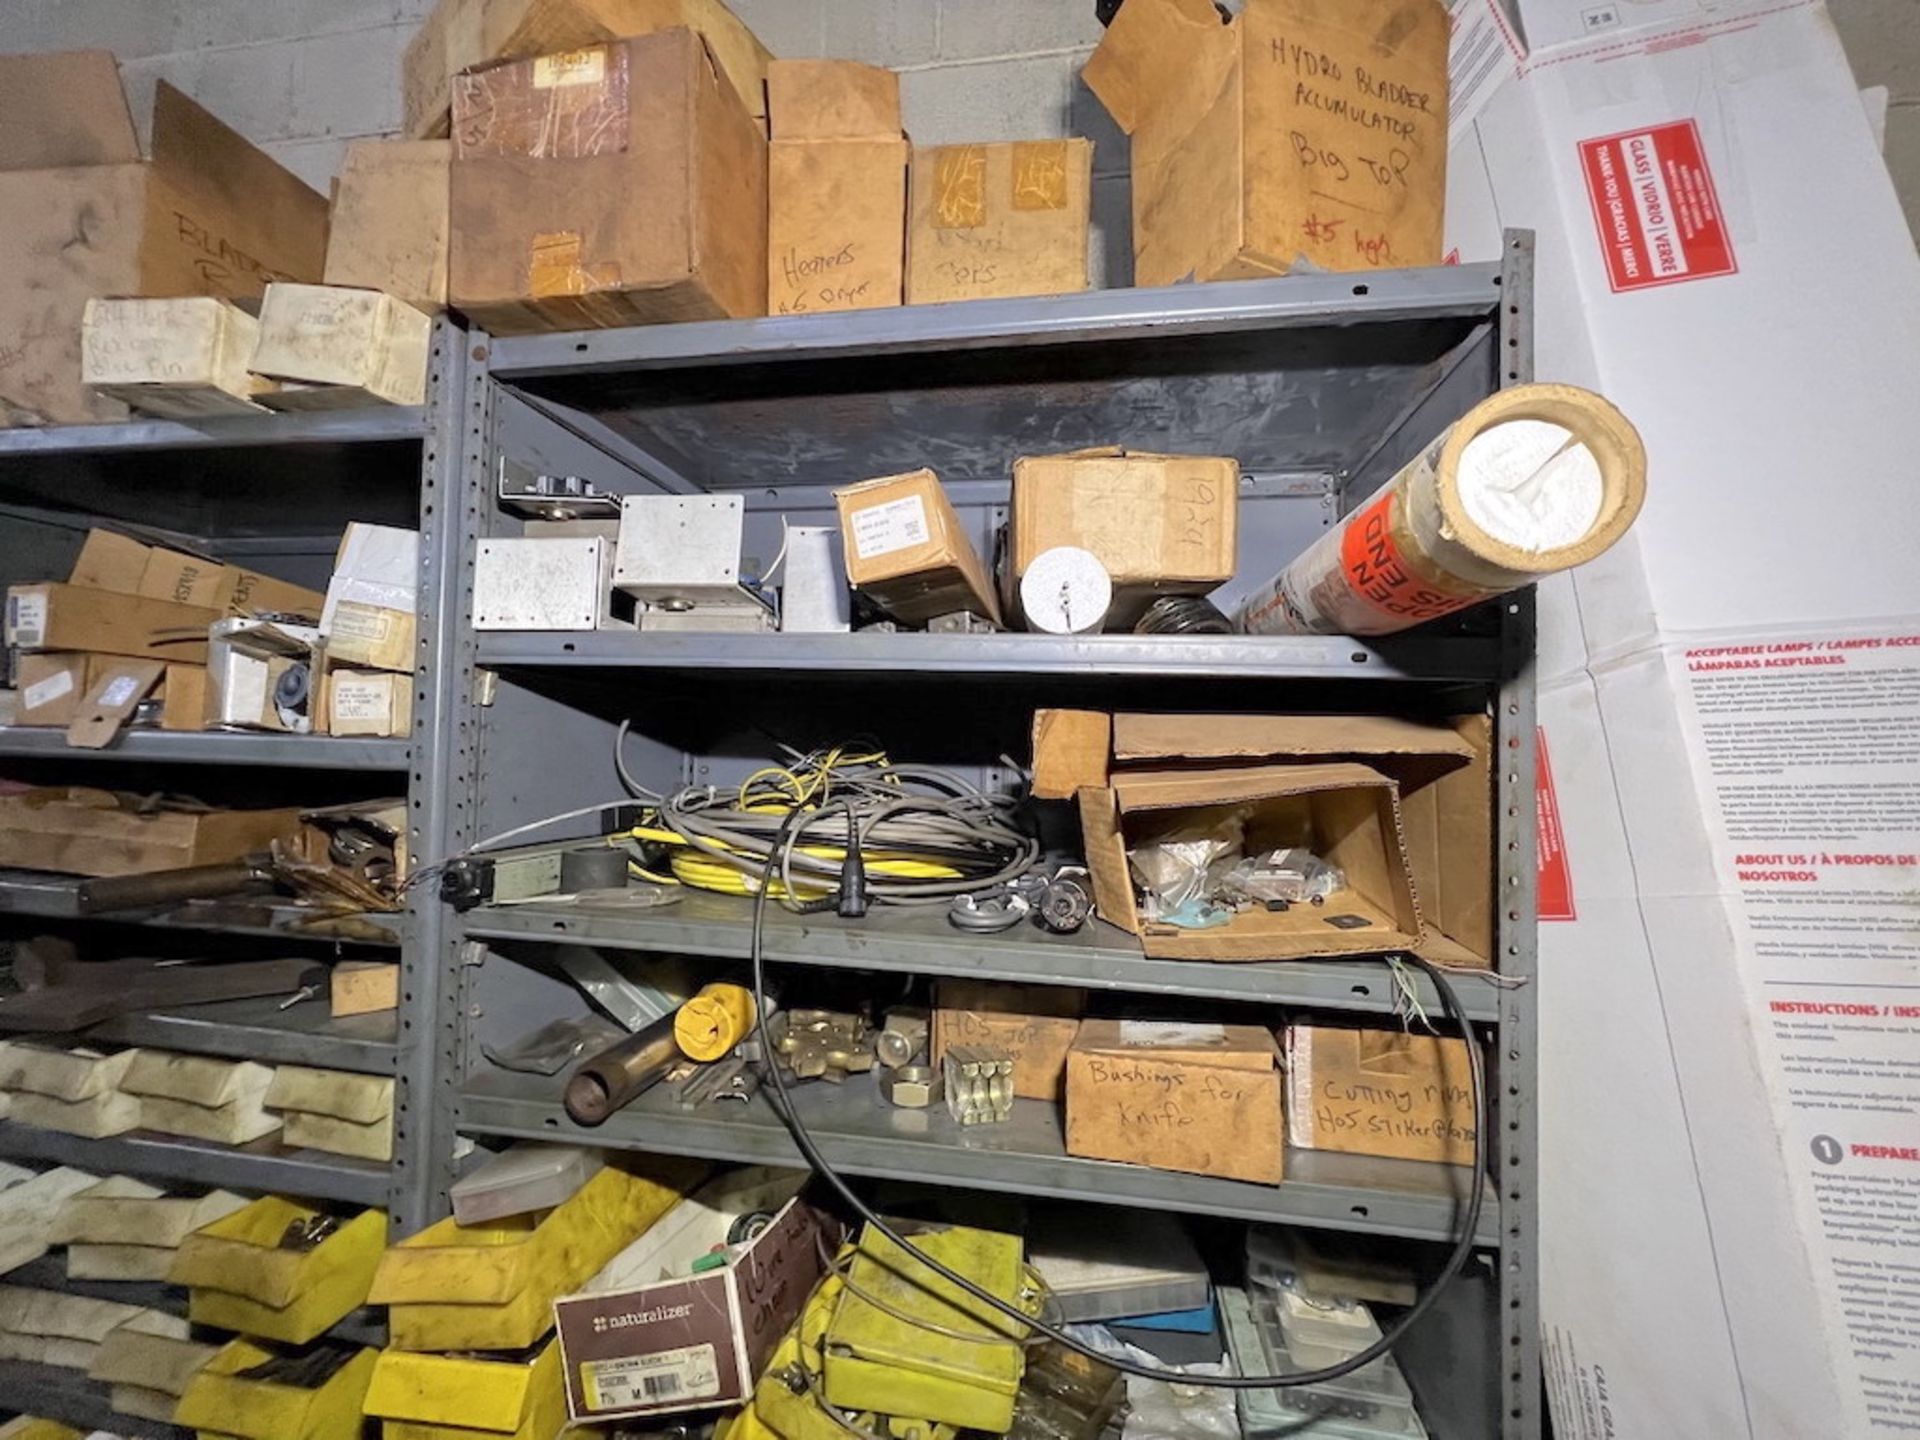 Remaining Contents of Parts Room - Image 30 of 60